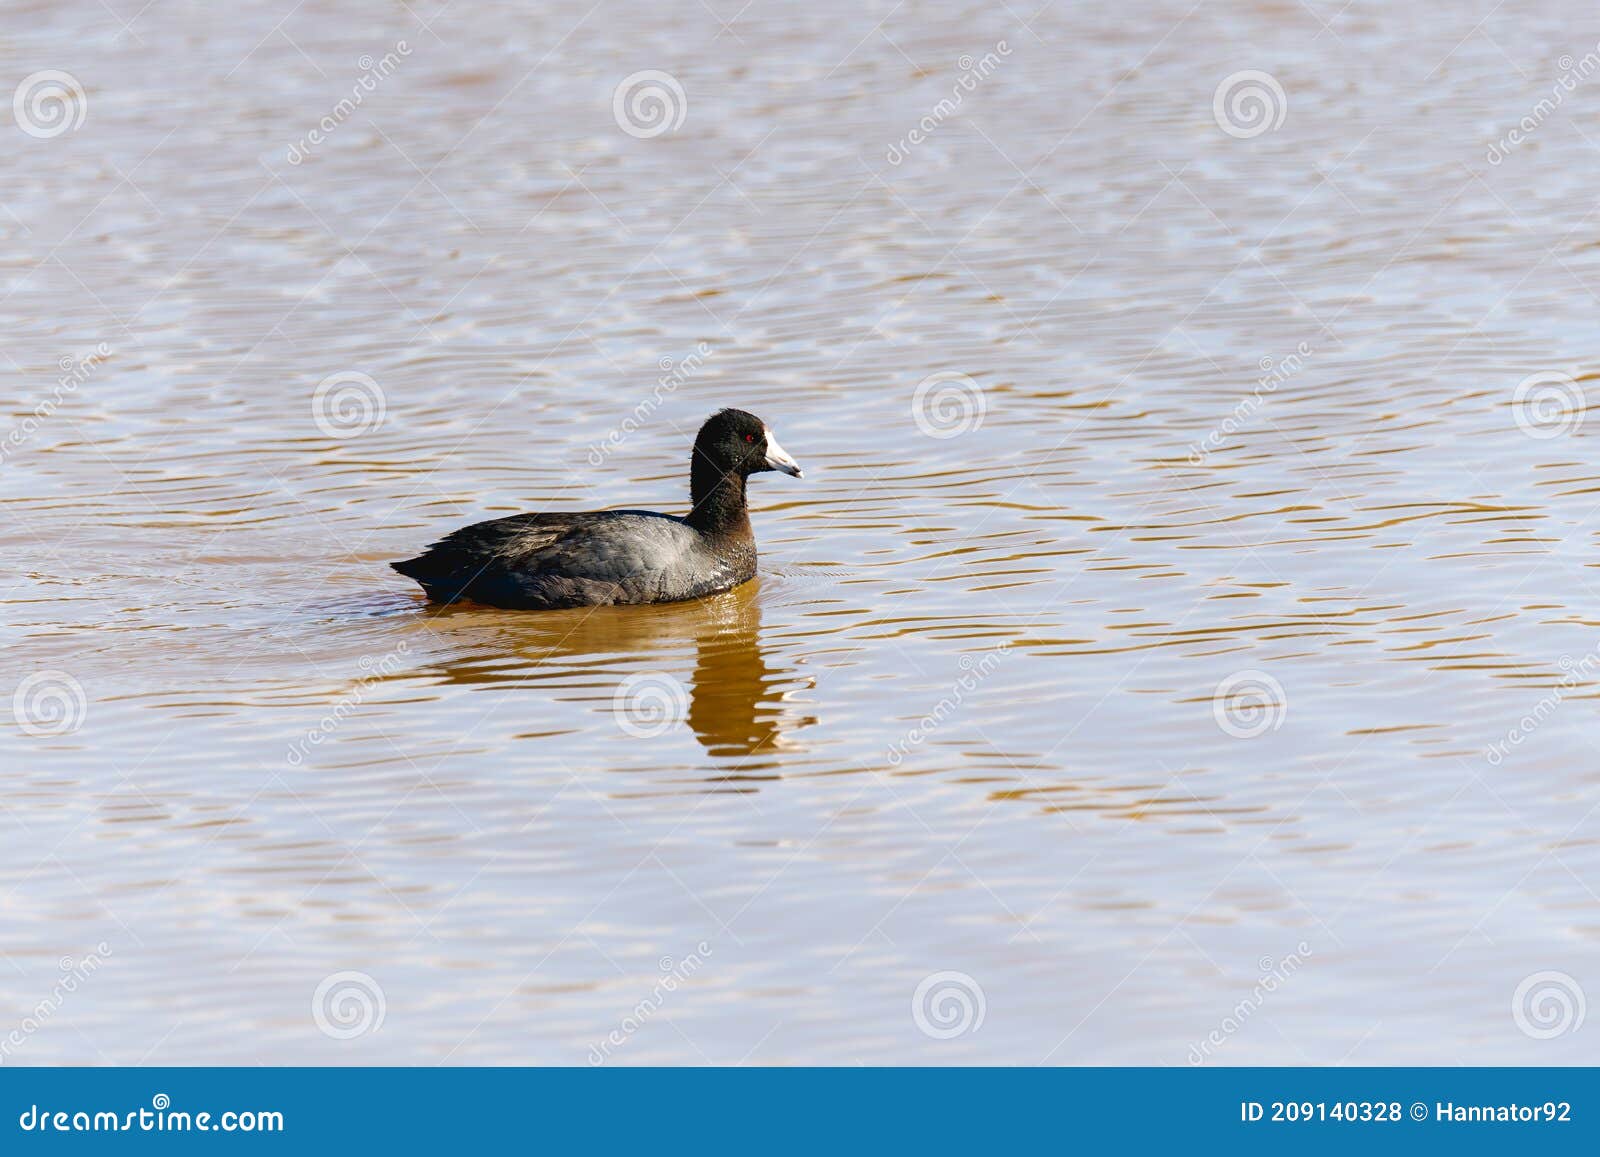 american coot  also known as a mud hen or pouldeau. oso flaco lake  ca